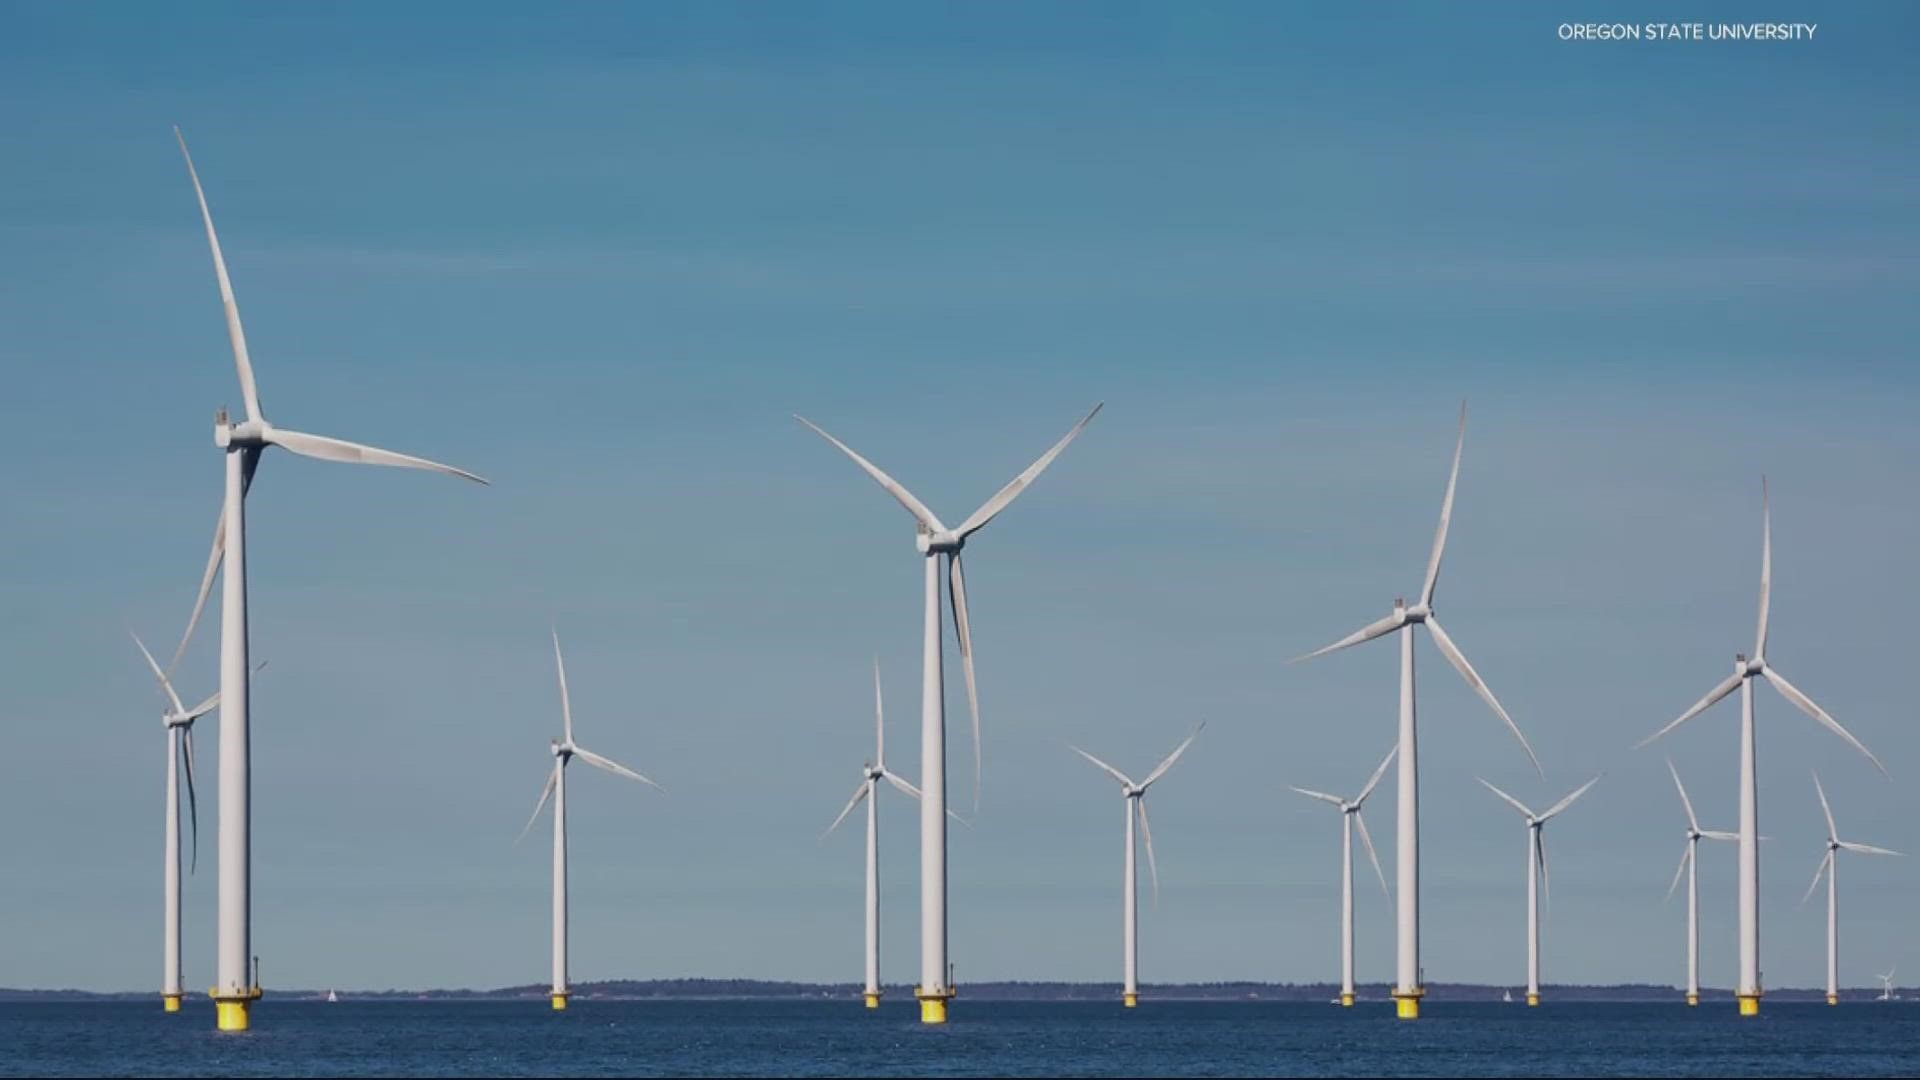 Industry leaders say offshore wind development will be a key piece of the puzzle for Oregon to hit 100% renewable energy production in the future.